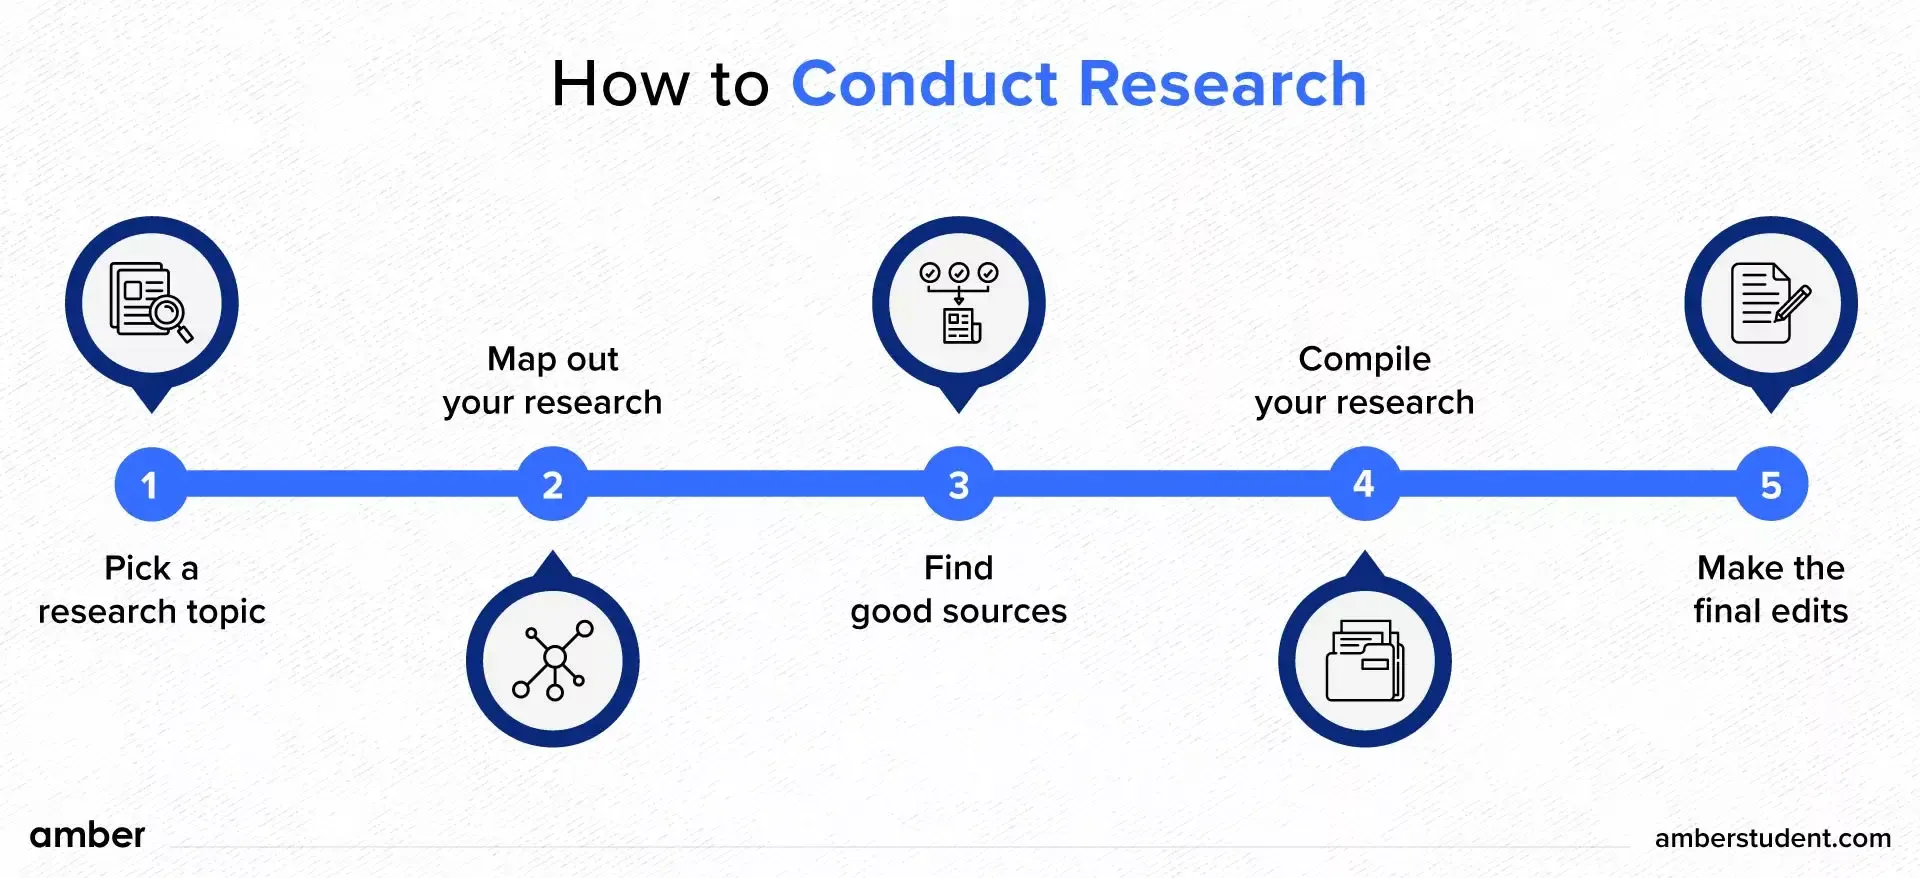 How to Conduct Research